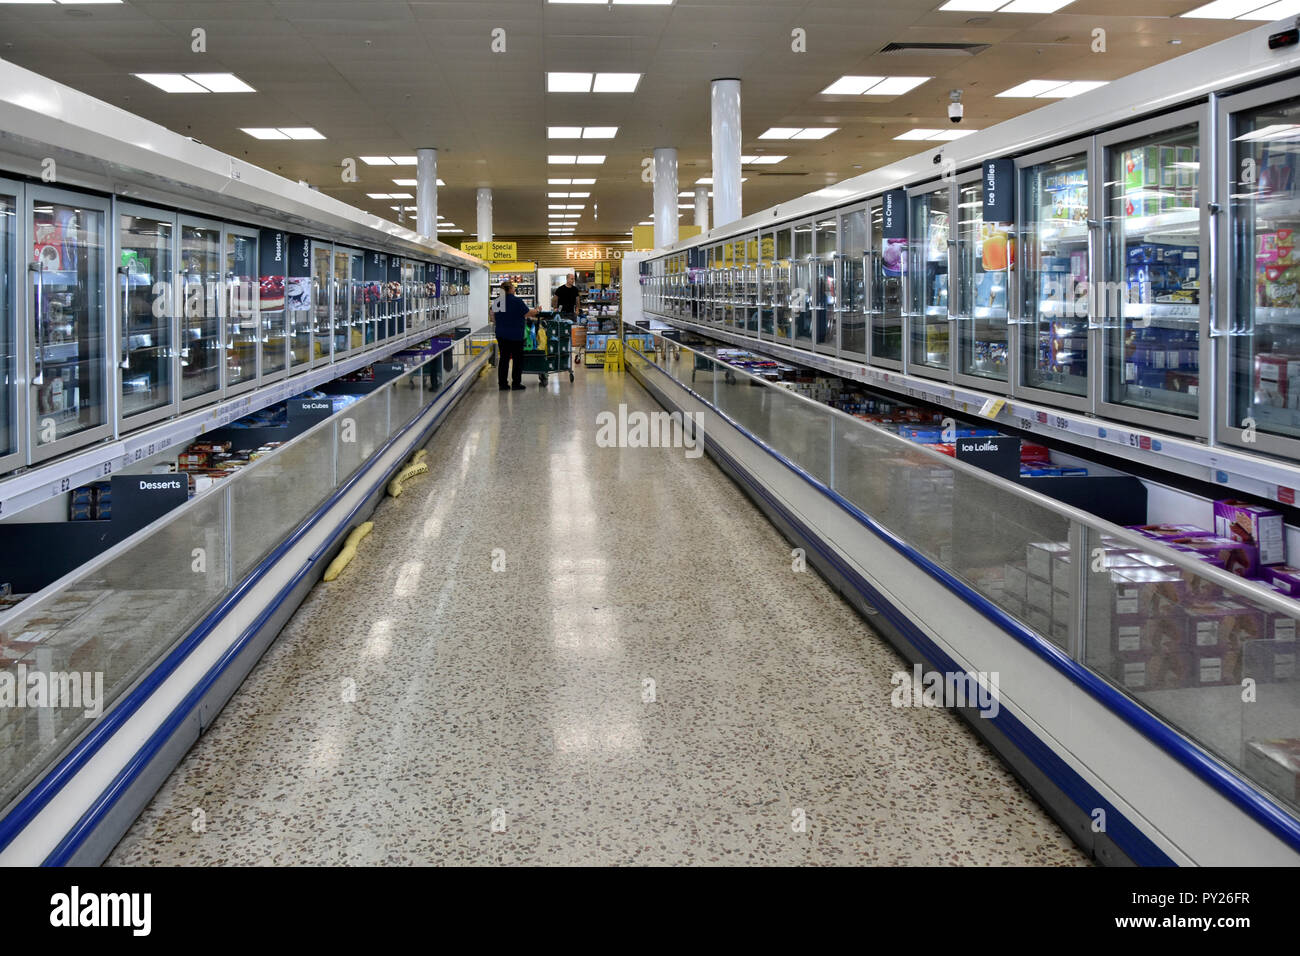 Food shopping supply chain Tesco supermarket store interior aisle frozen food cold cabinets including deserts ice lollies ice cream London England UK Stock Photo